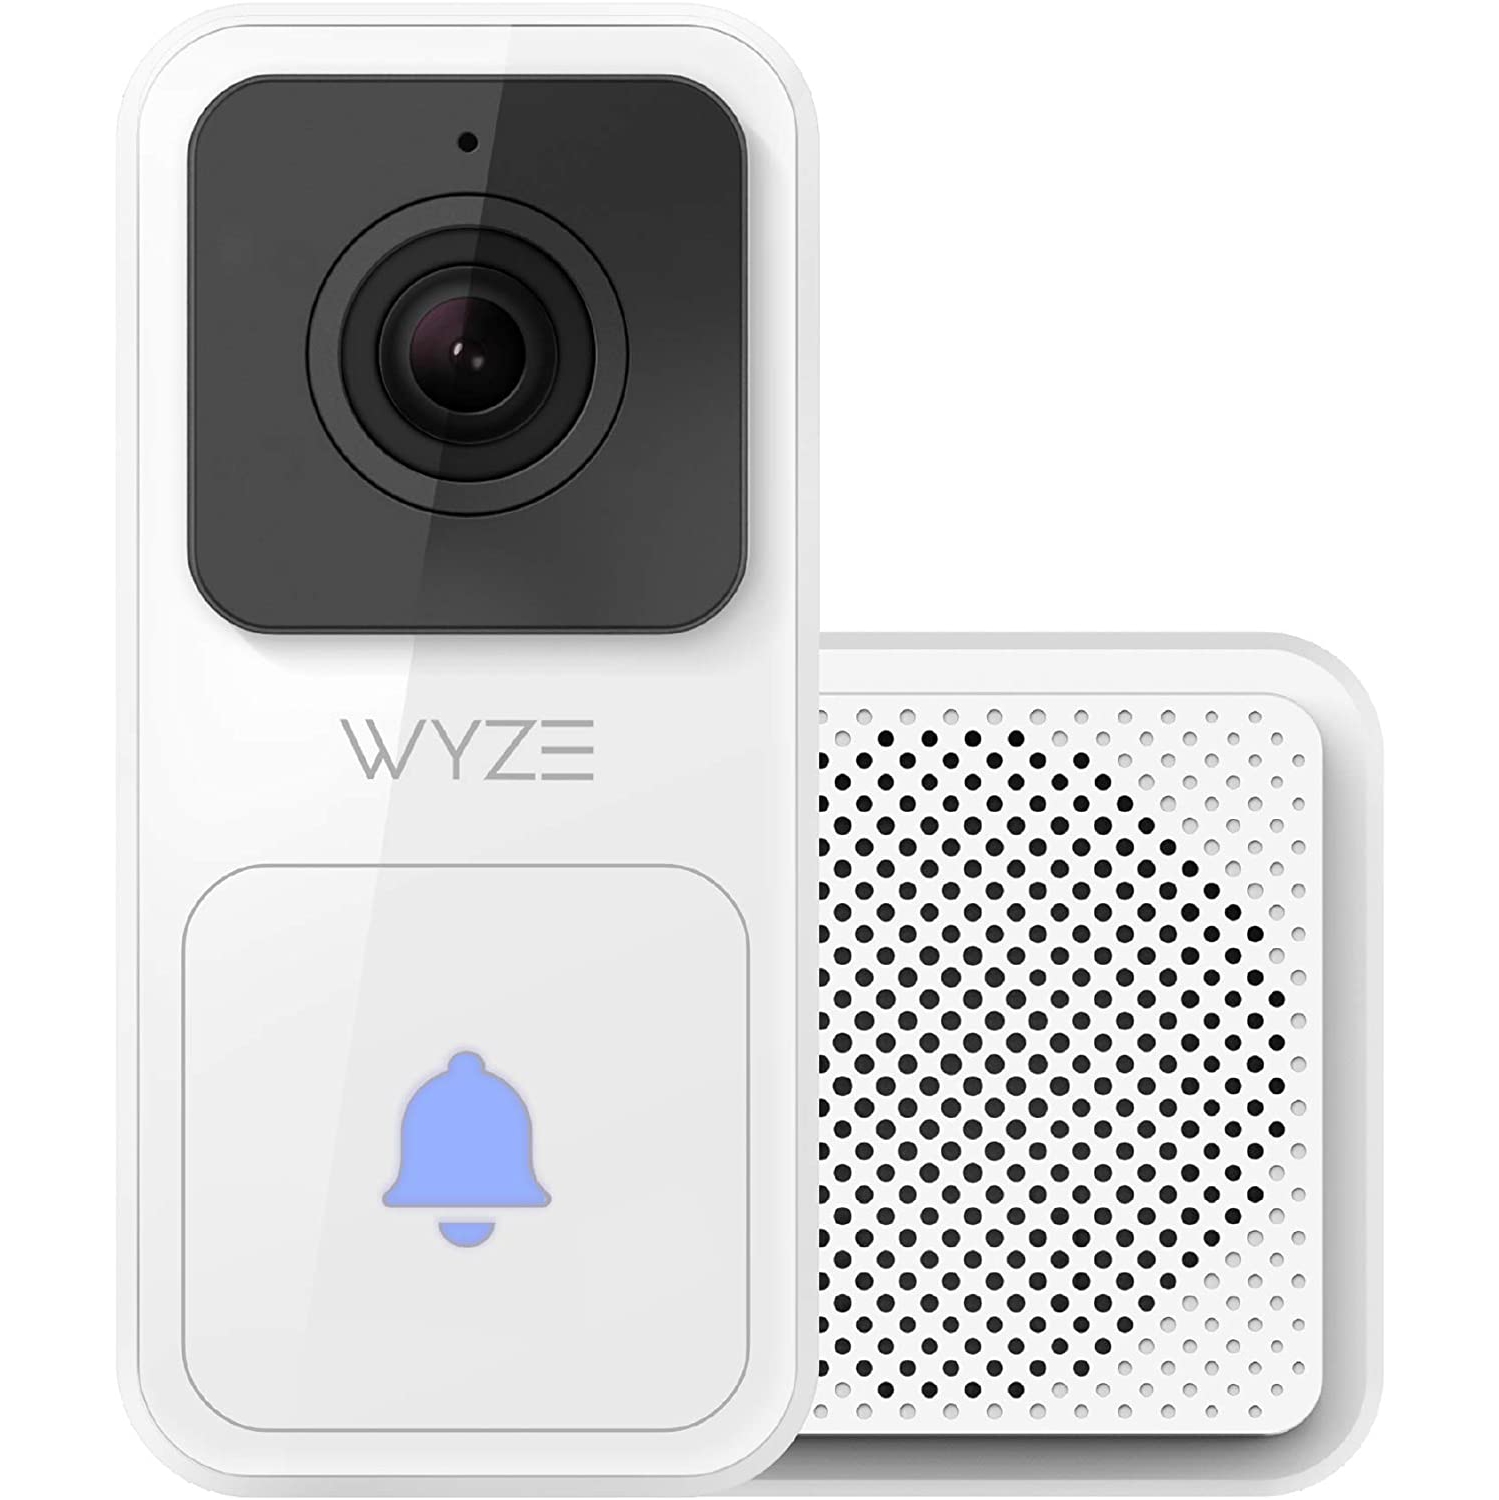 Wyze Video Doorbell with Chime 1080p HD Video,2-Way Audio, Night Vision